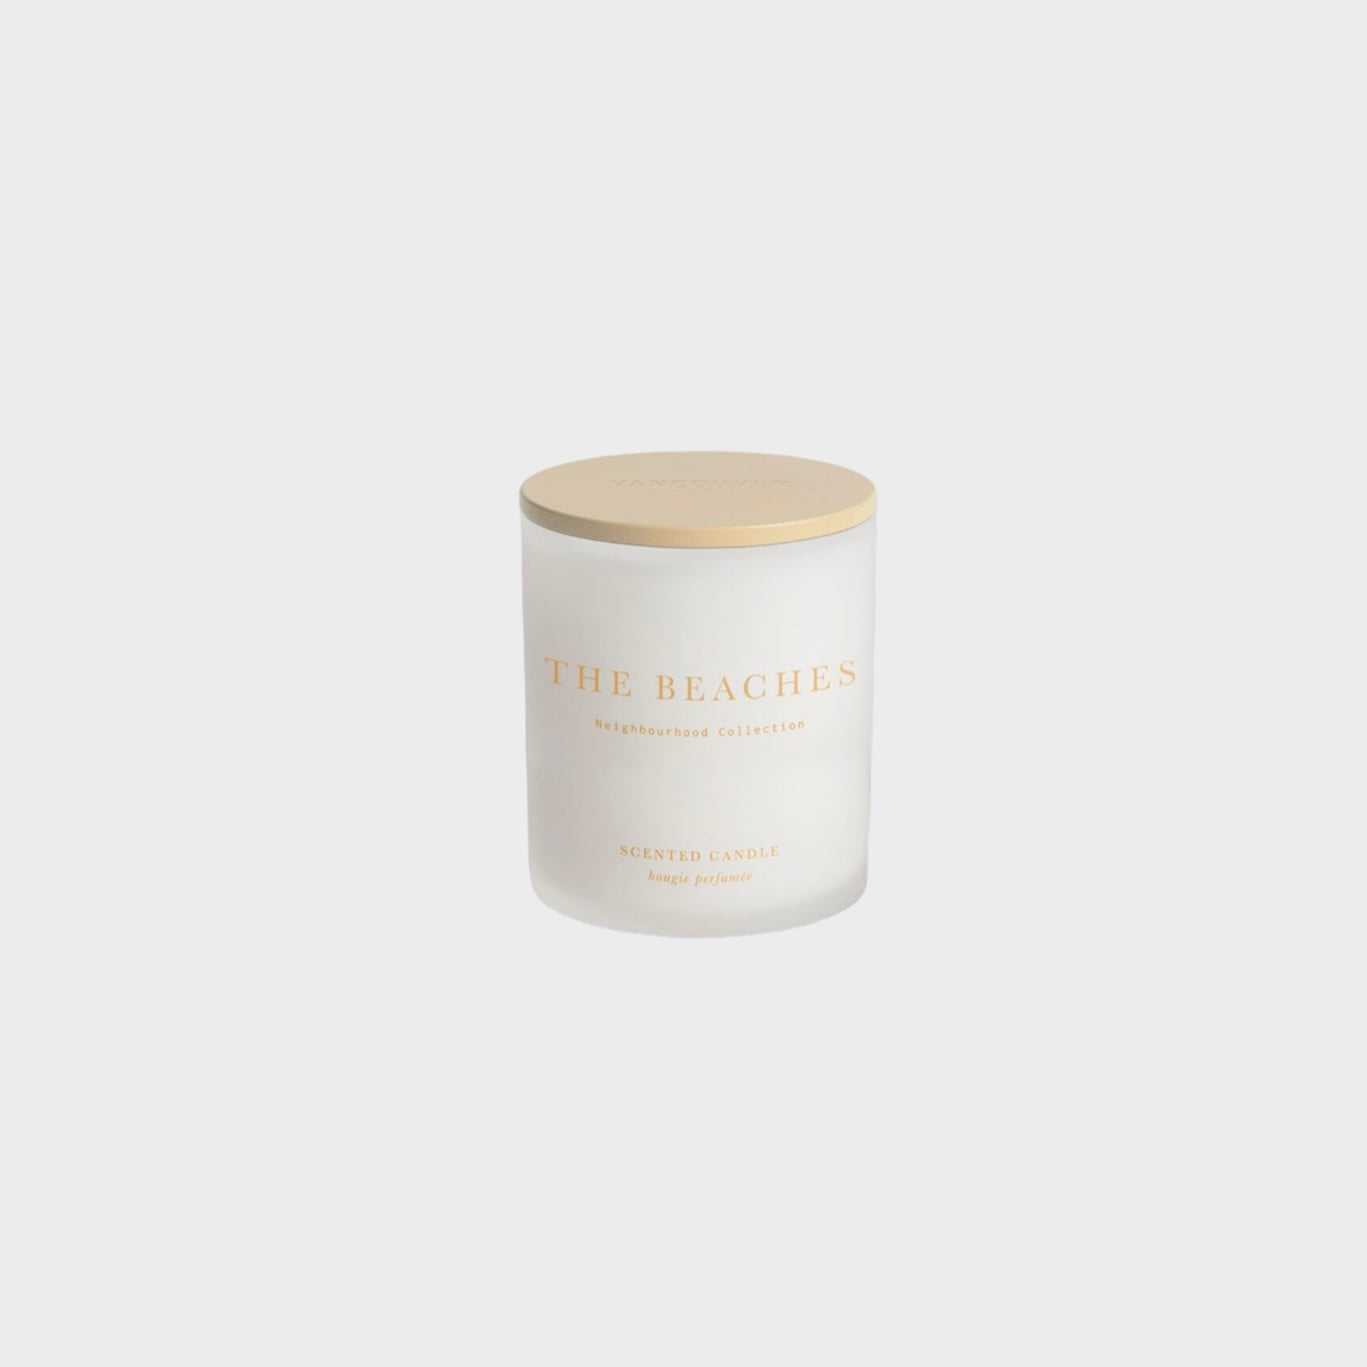 The Beaches Votive Candle